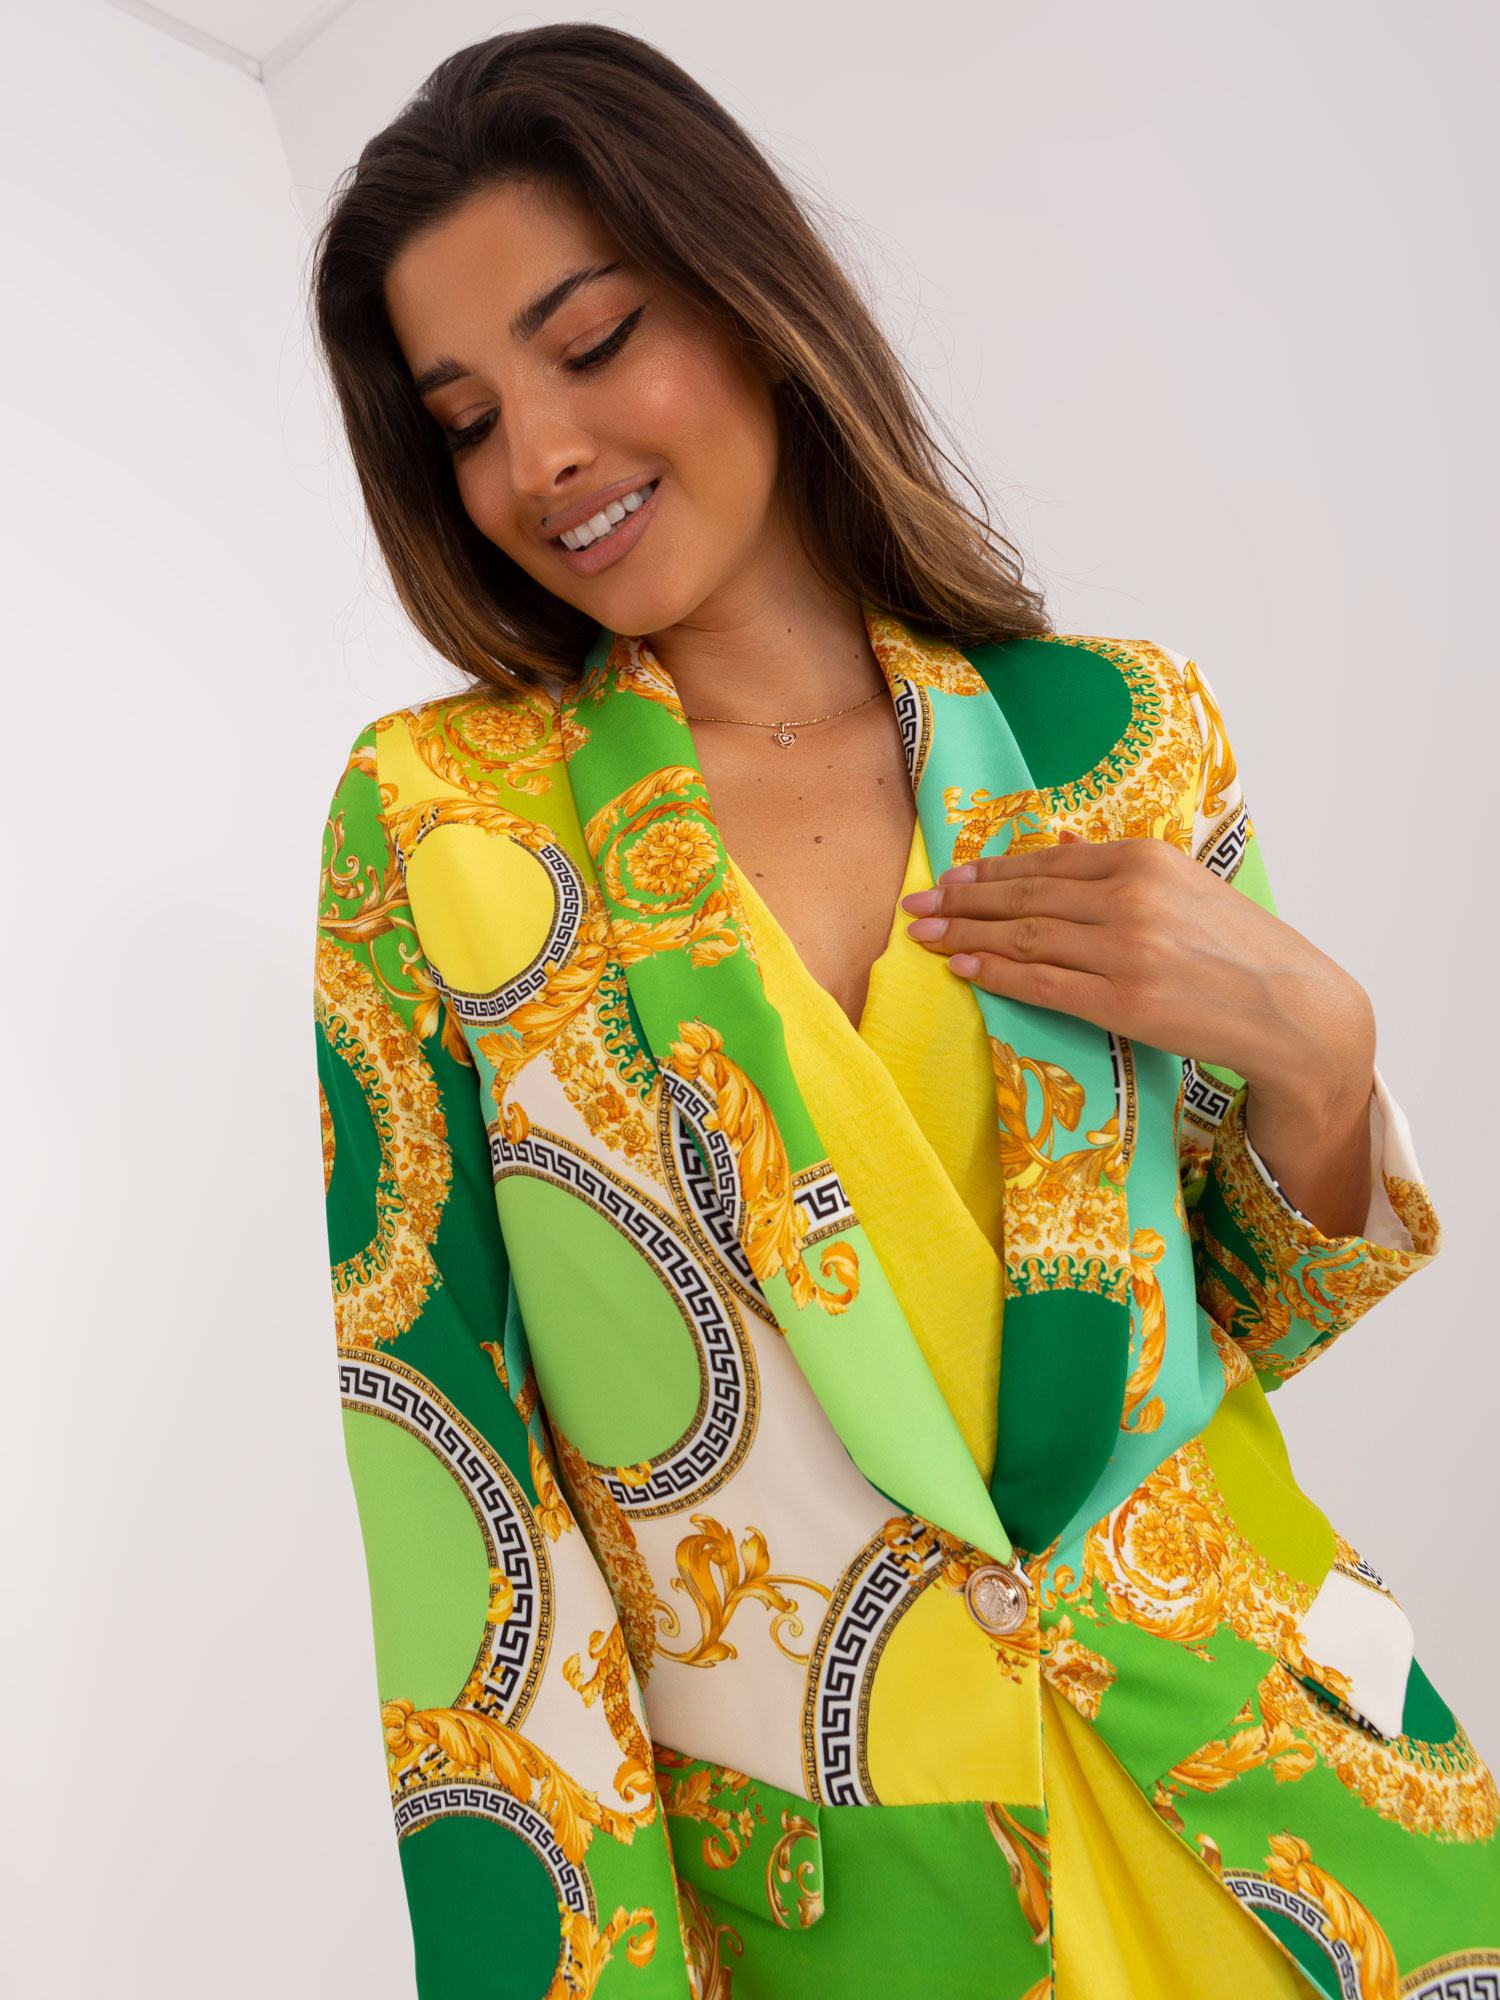 Lady's green-yellow patterned jacket